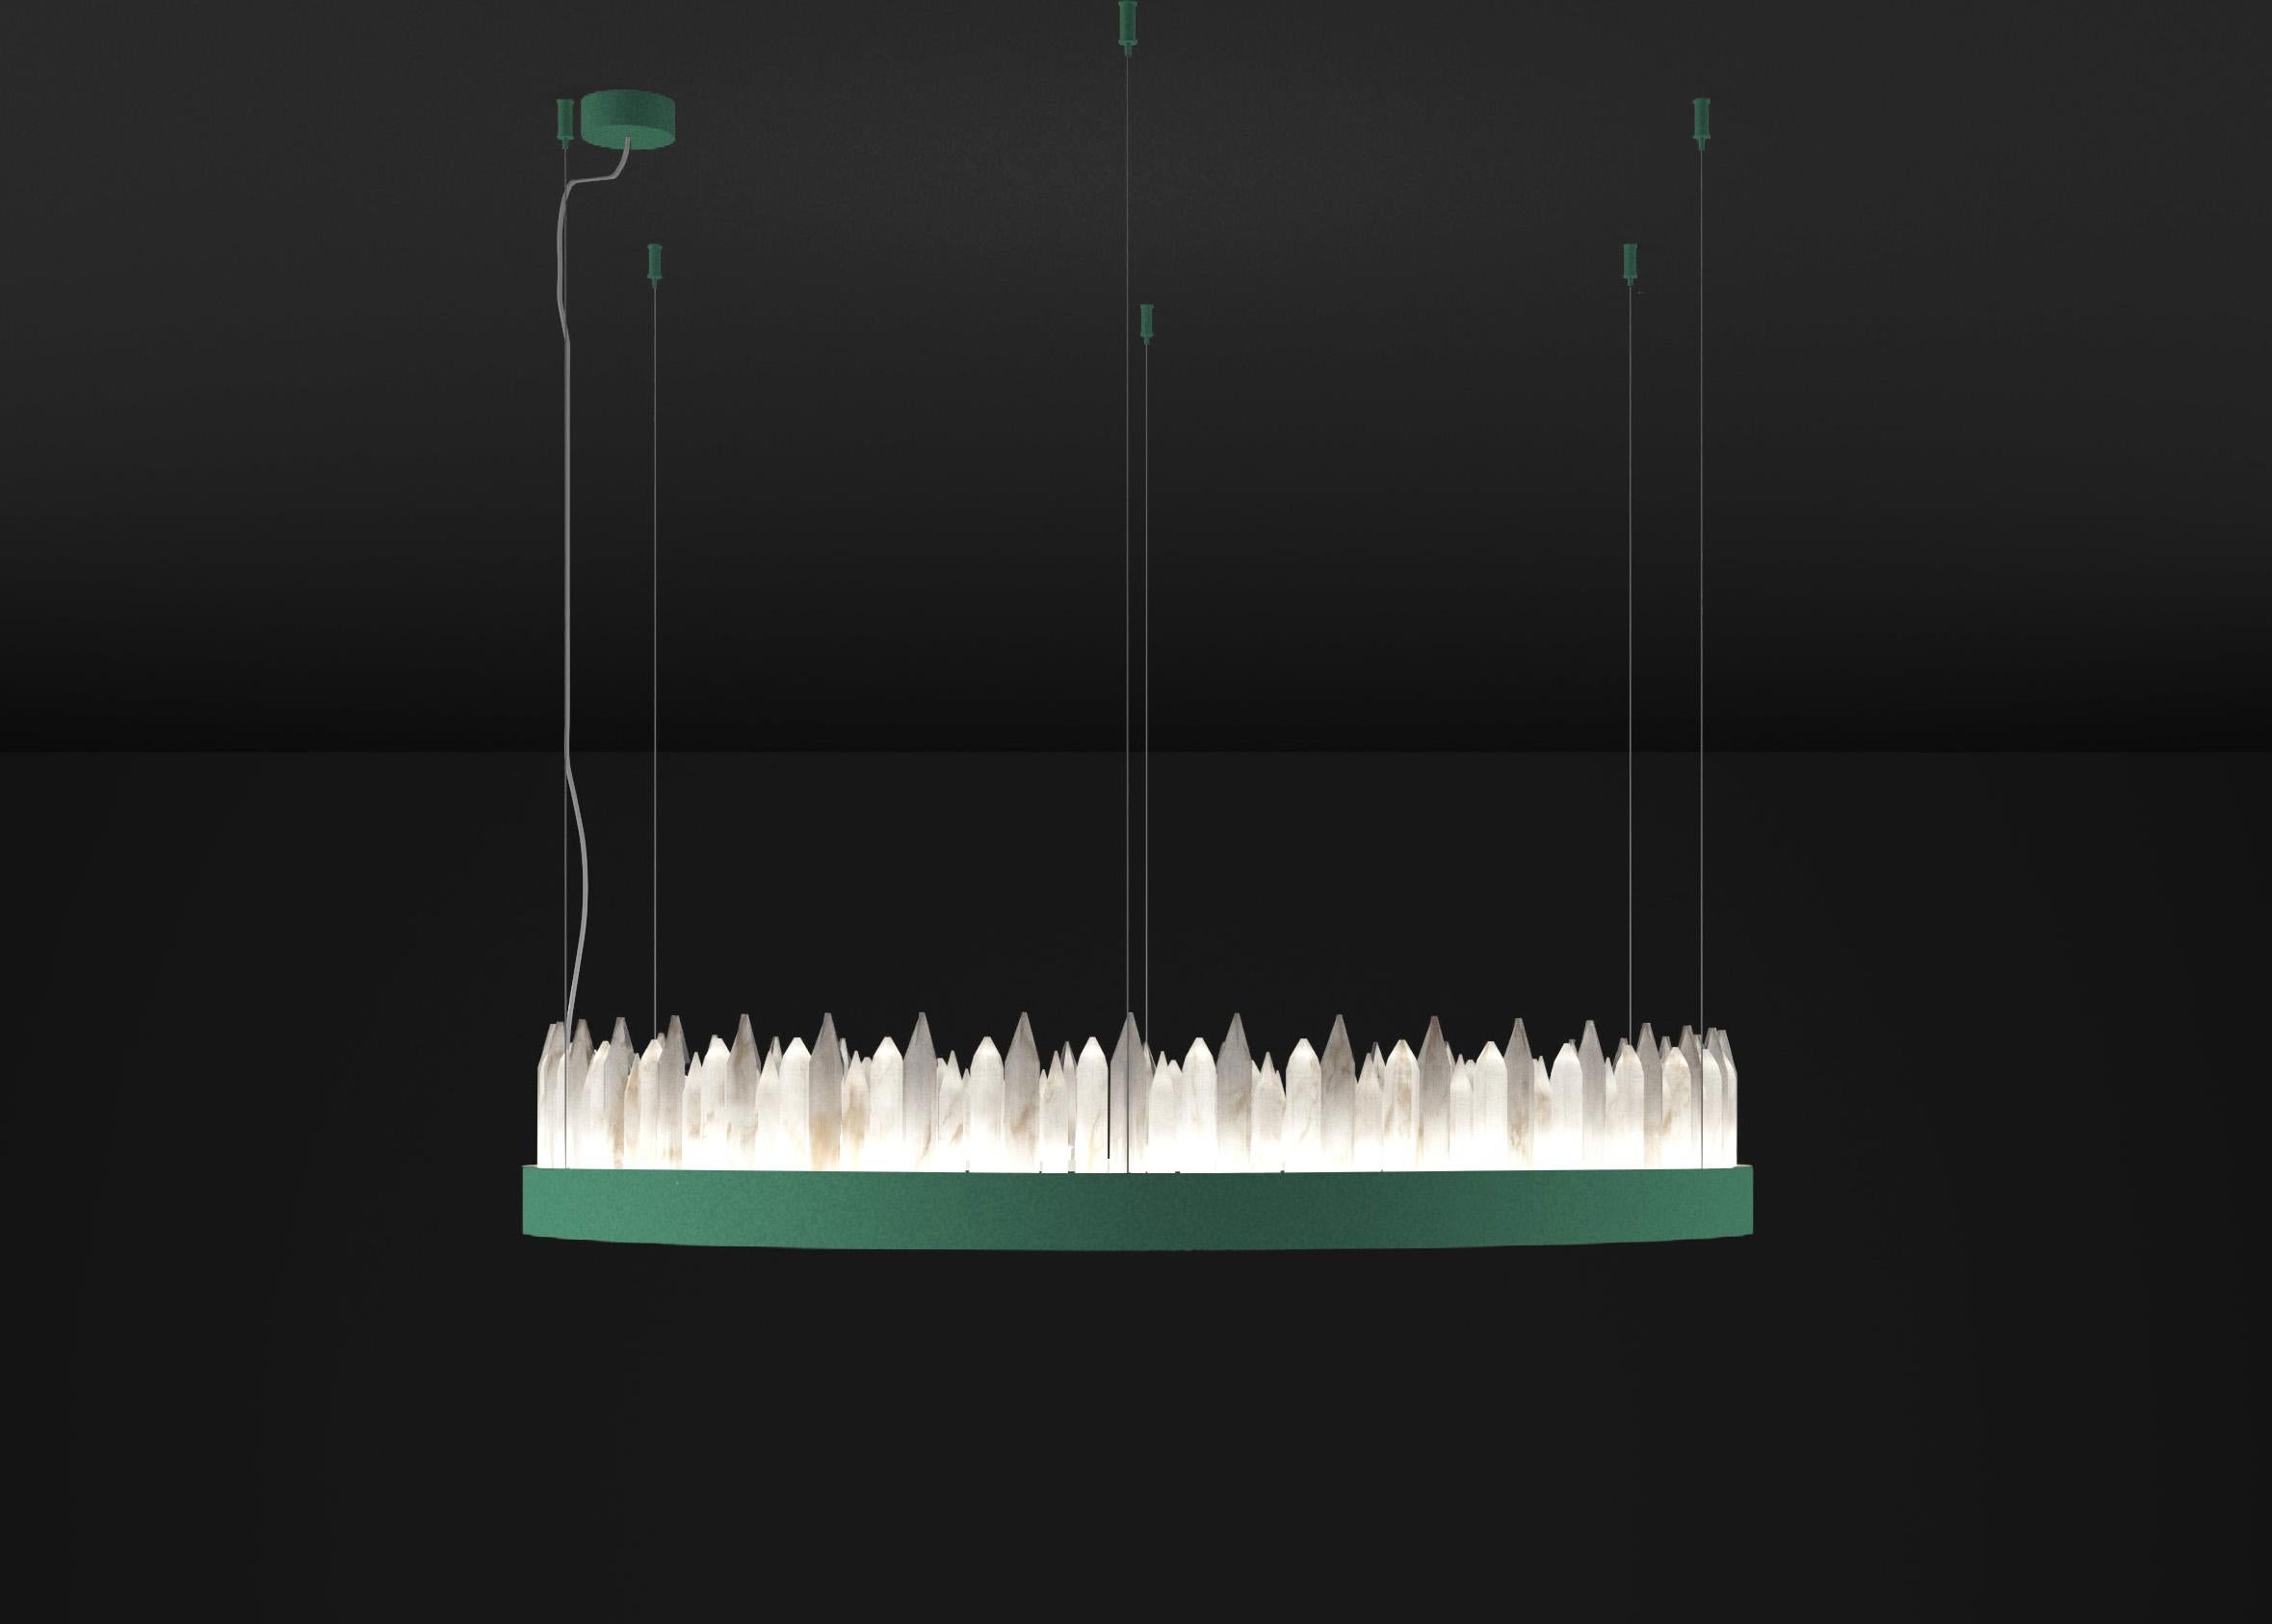 Urano Freedom Green 100 Pendant Light 2 by Alabastro Italiano
Dimensions: Ø 100 x H 20 cm.
Materials: Glass and freedom green metal.

Available in different sizes: Ø 60, Ø 80, Ø 100 and Ø 120 cm. 
Available in different finishes: Shiny Silver,